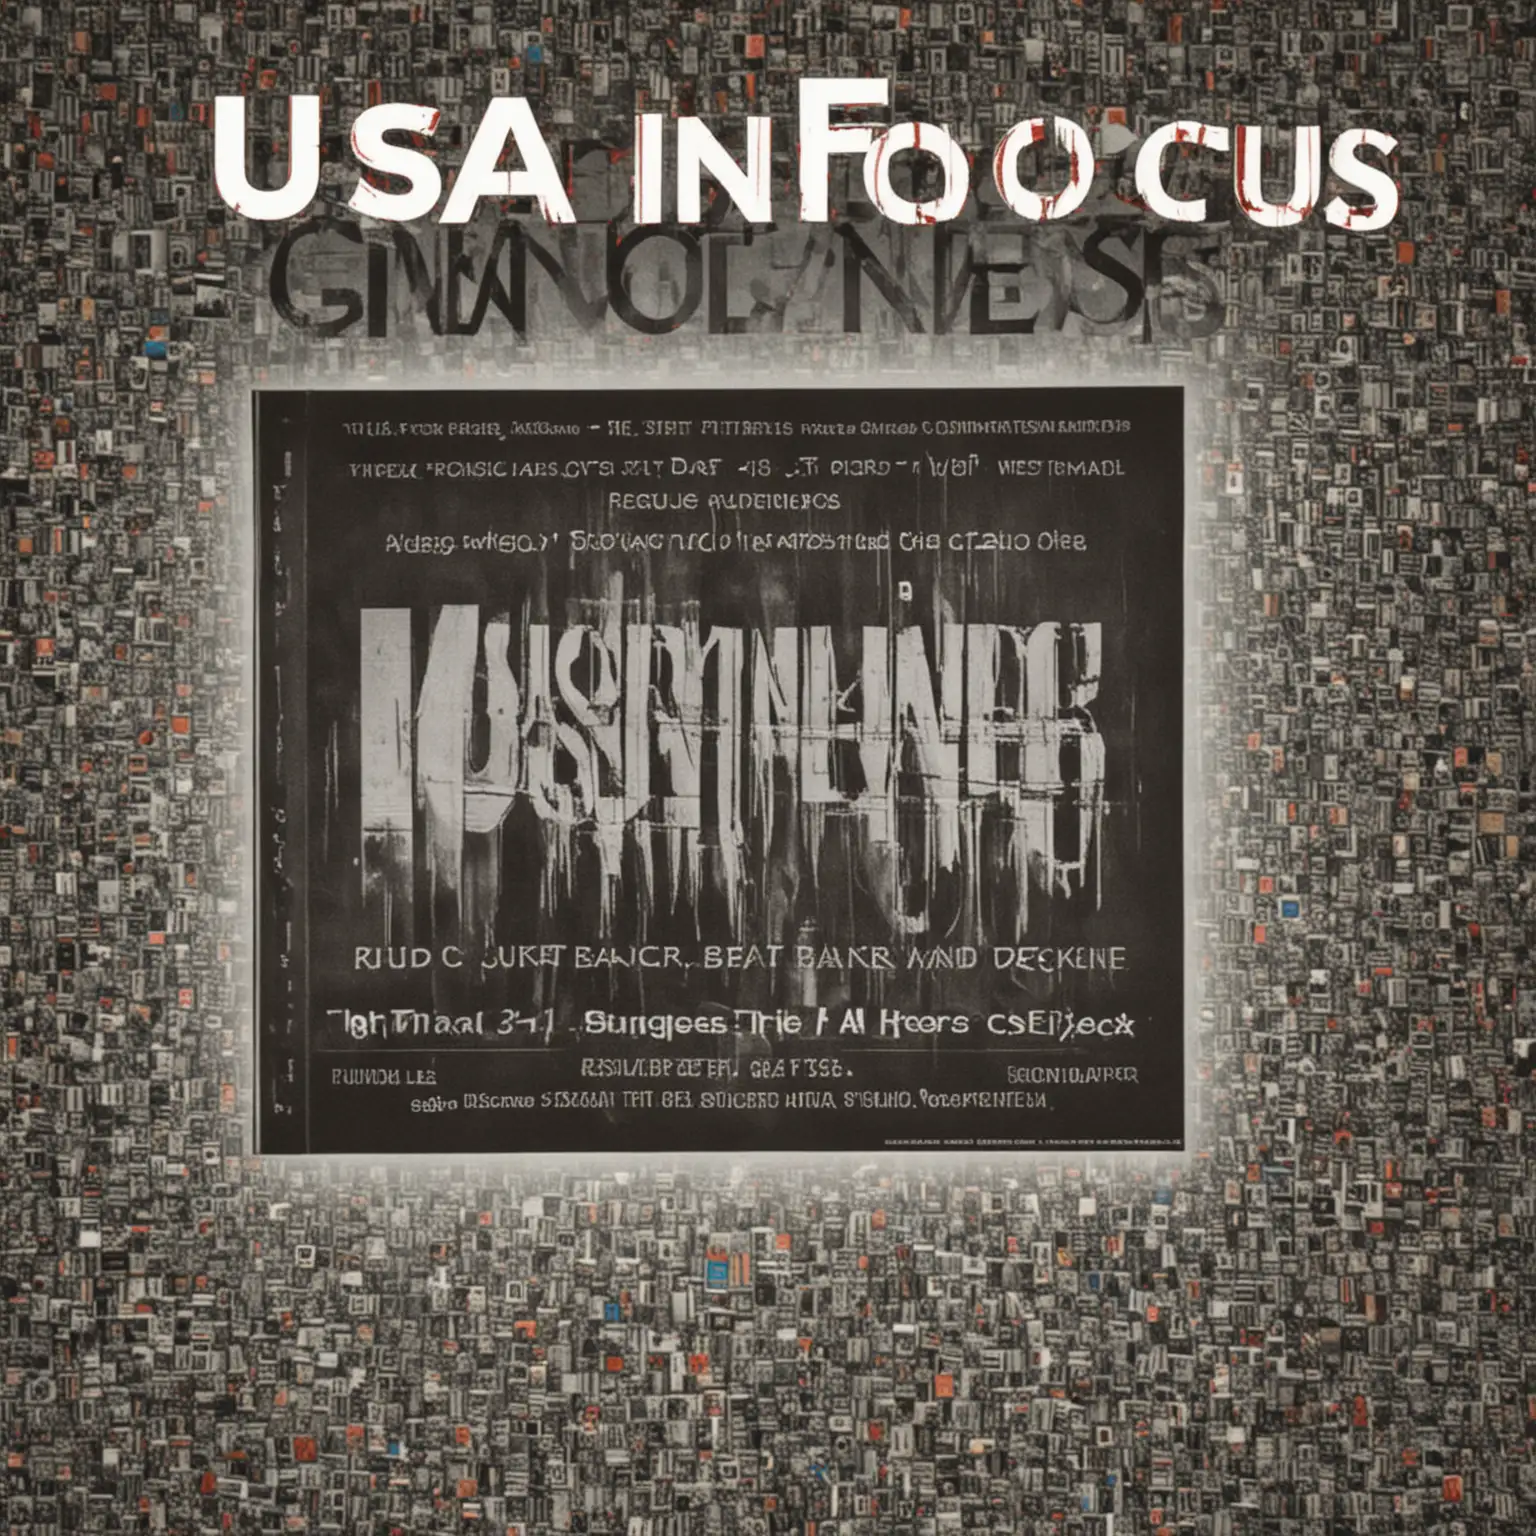 USA in Focus Magazine generate some images related to a music channel.